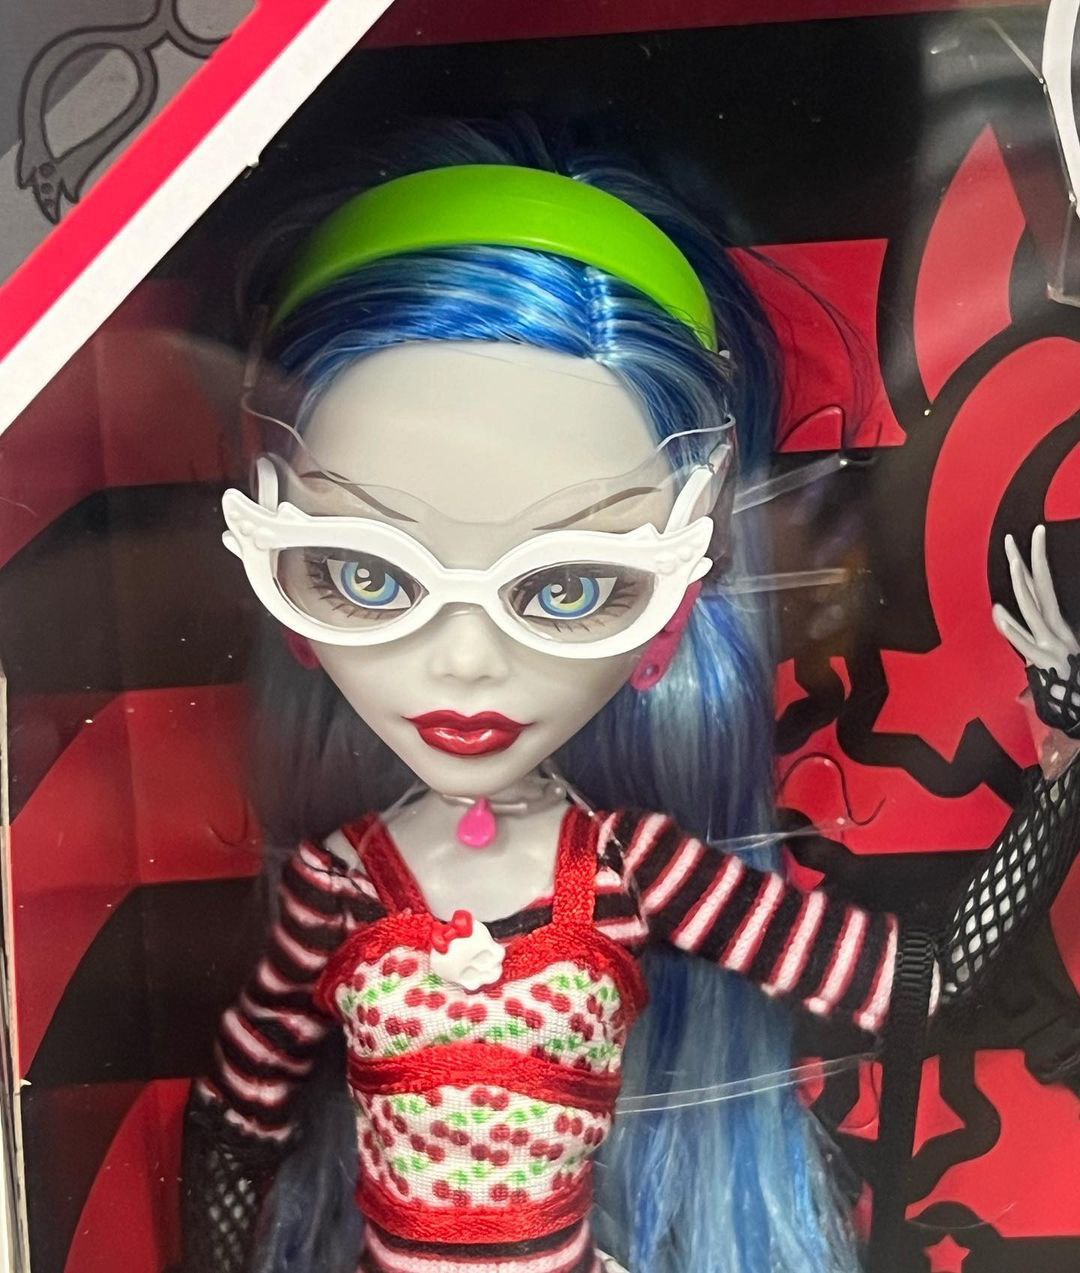 Ghoulia Yelps  Monster high ghoulia, Monster high dolls, Monster high